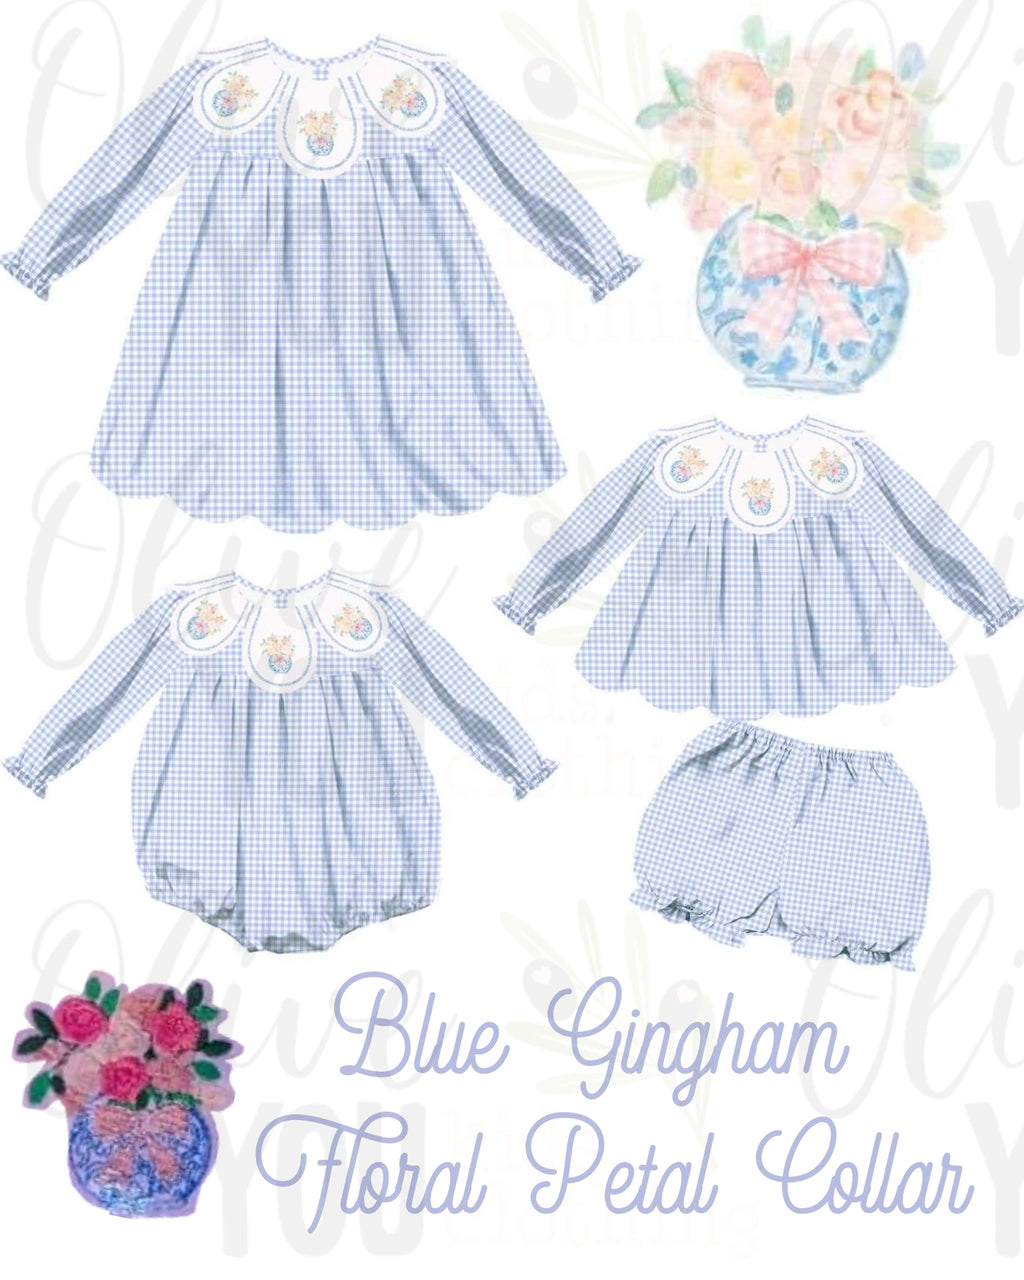 Gingham Floral Petal Collar Collection